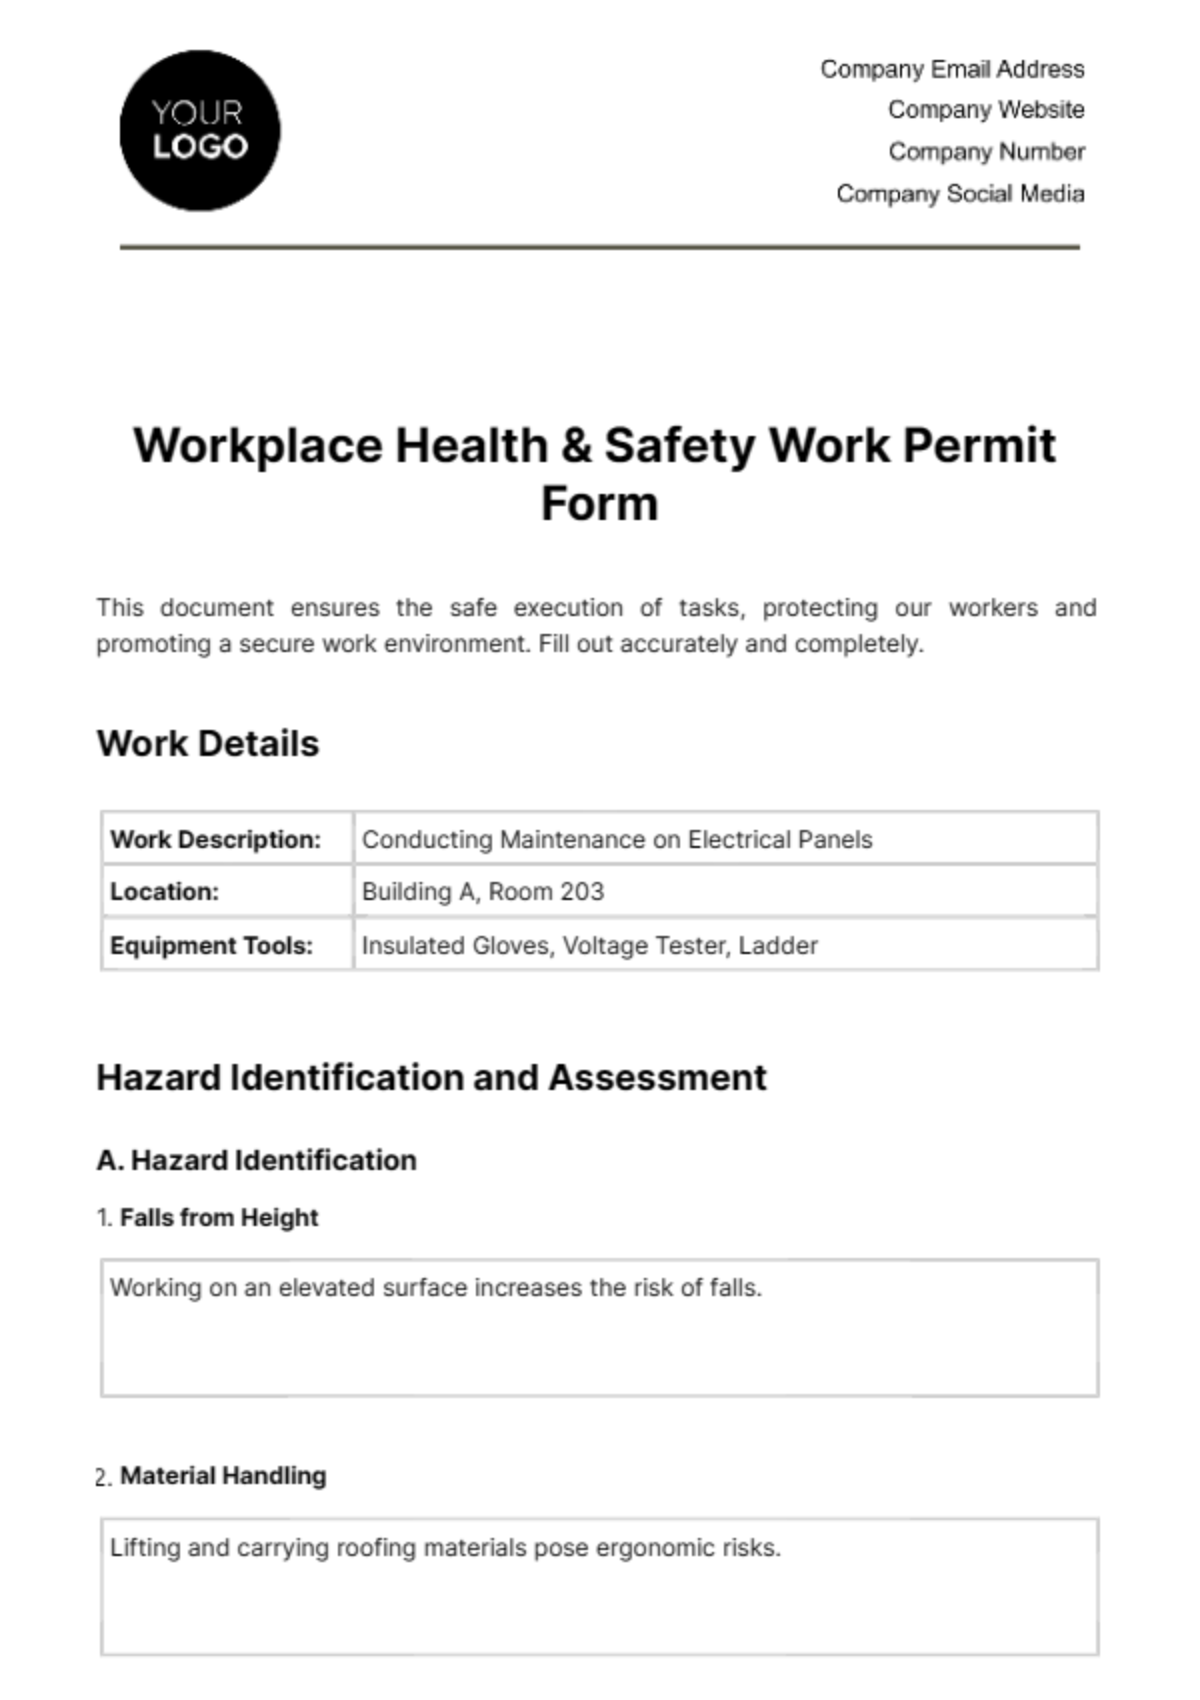 Workplace Health & Safety Work Permit Form Template